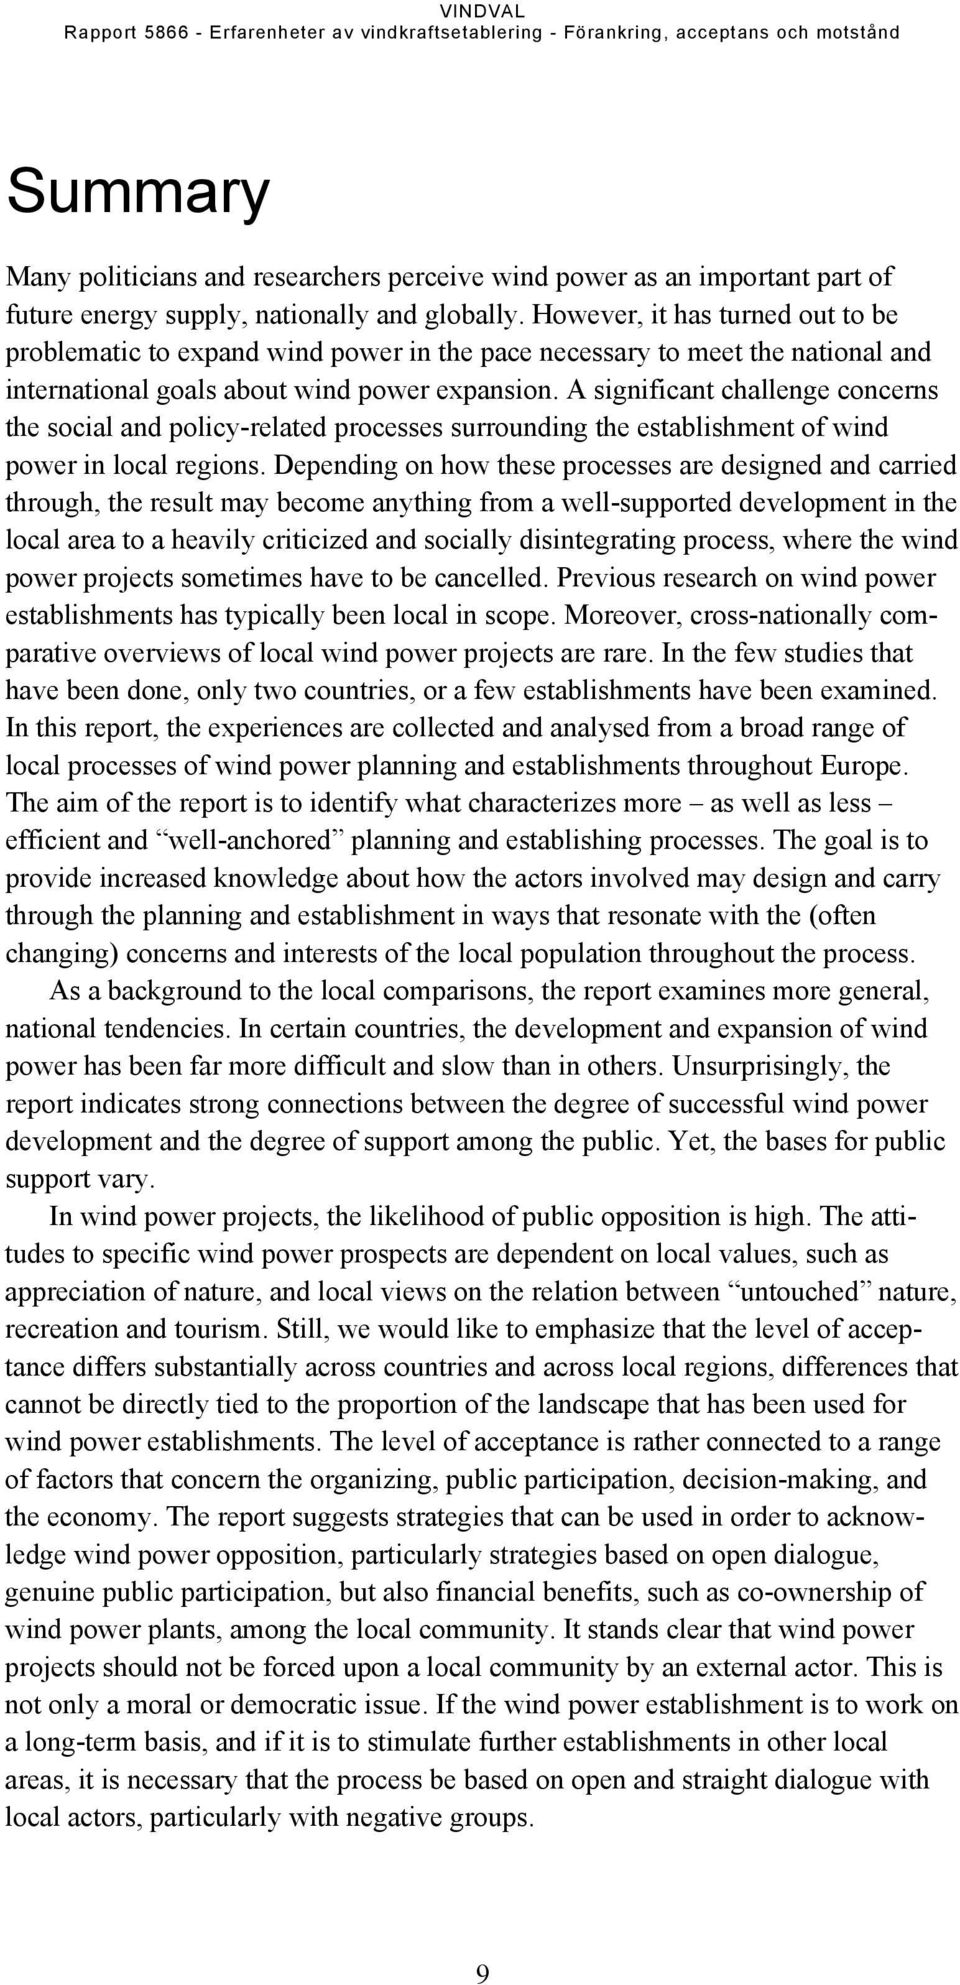 A significant challenge concerns the social and policy-related processes surrounding the establishment of wind power in local regions.